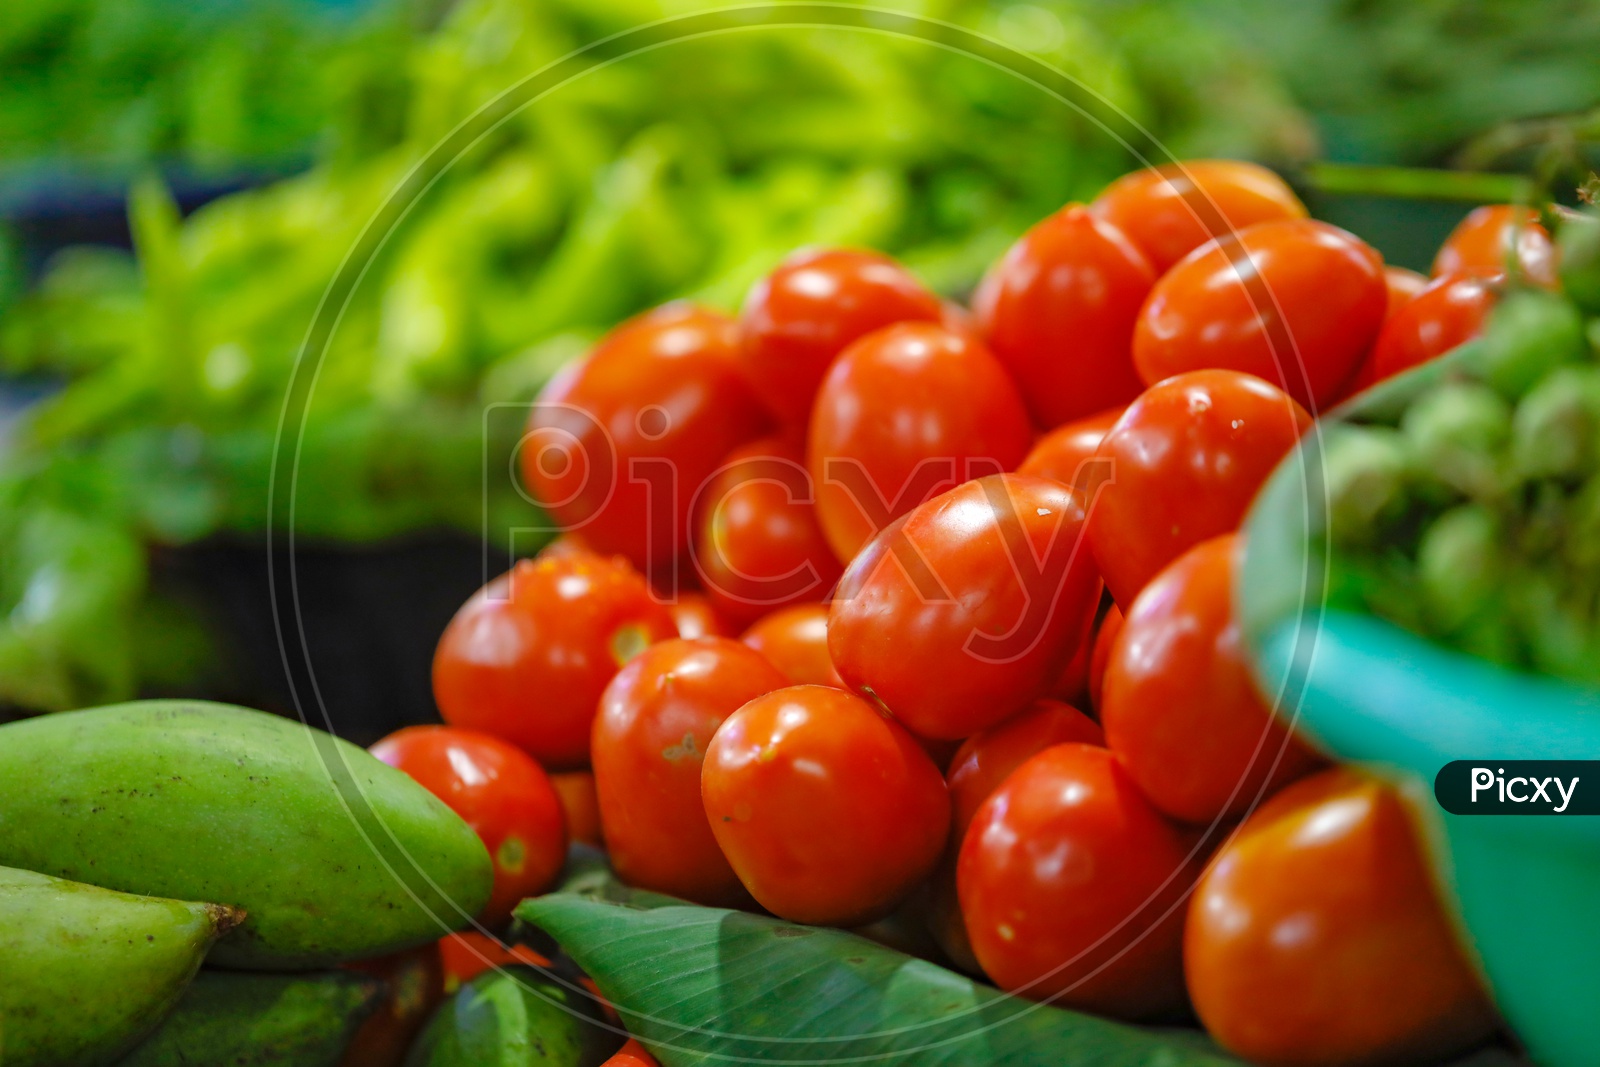 Fresh Tomatoes  In  a Vegetable Vendor Stall or Shop in Market